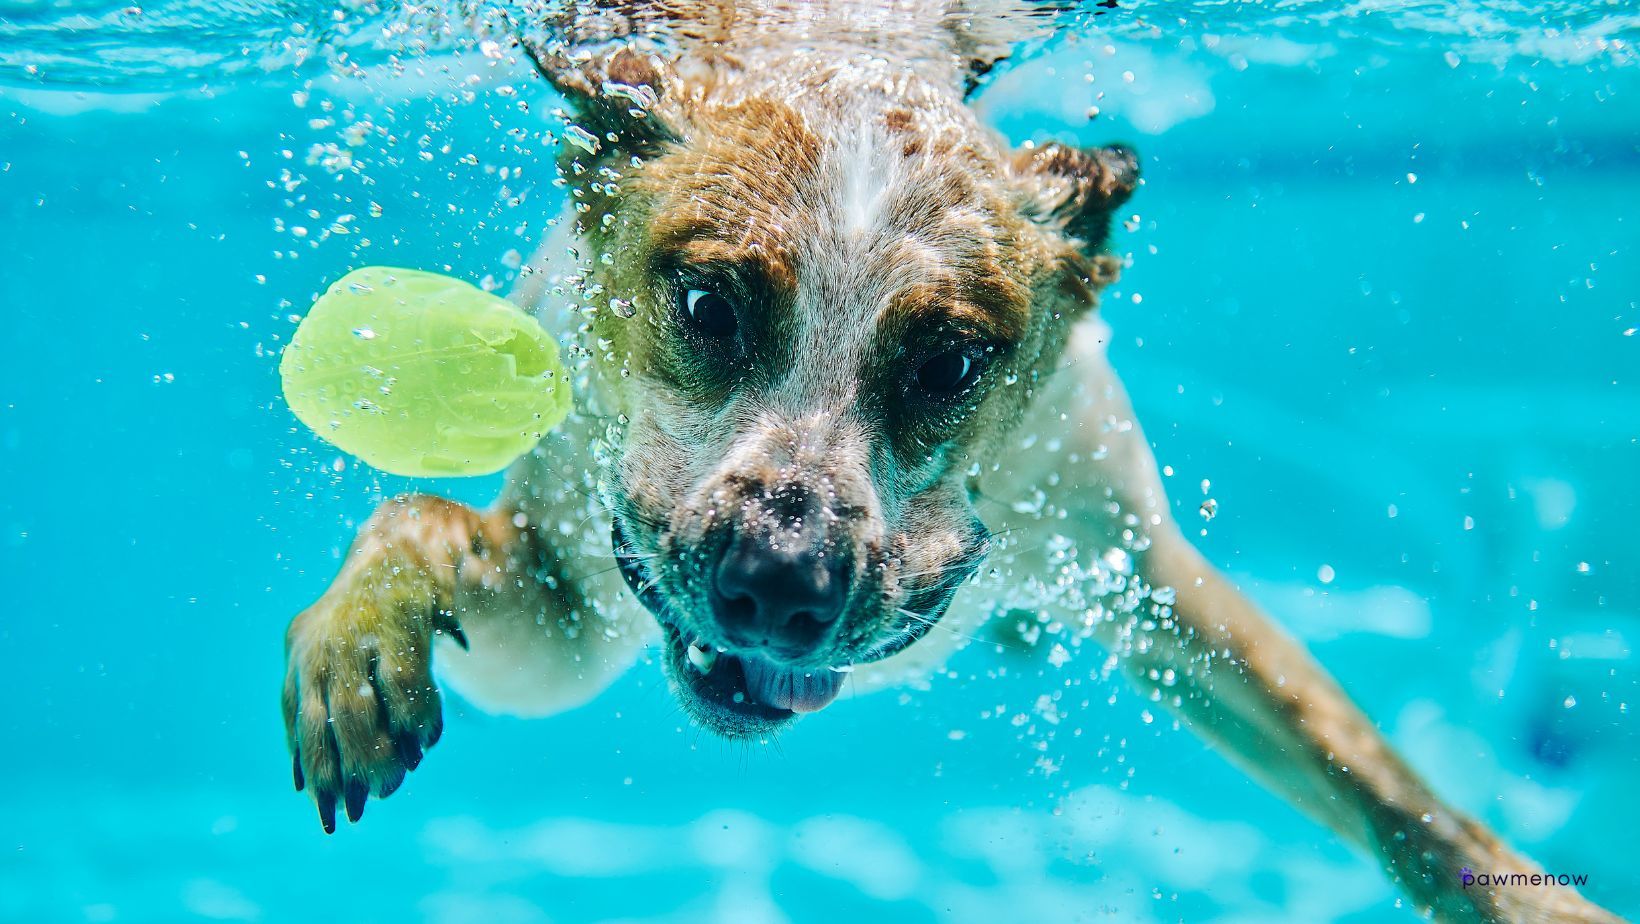 Can a dog hold their breath underwater